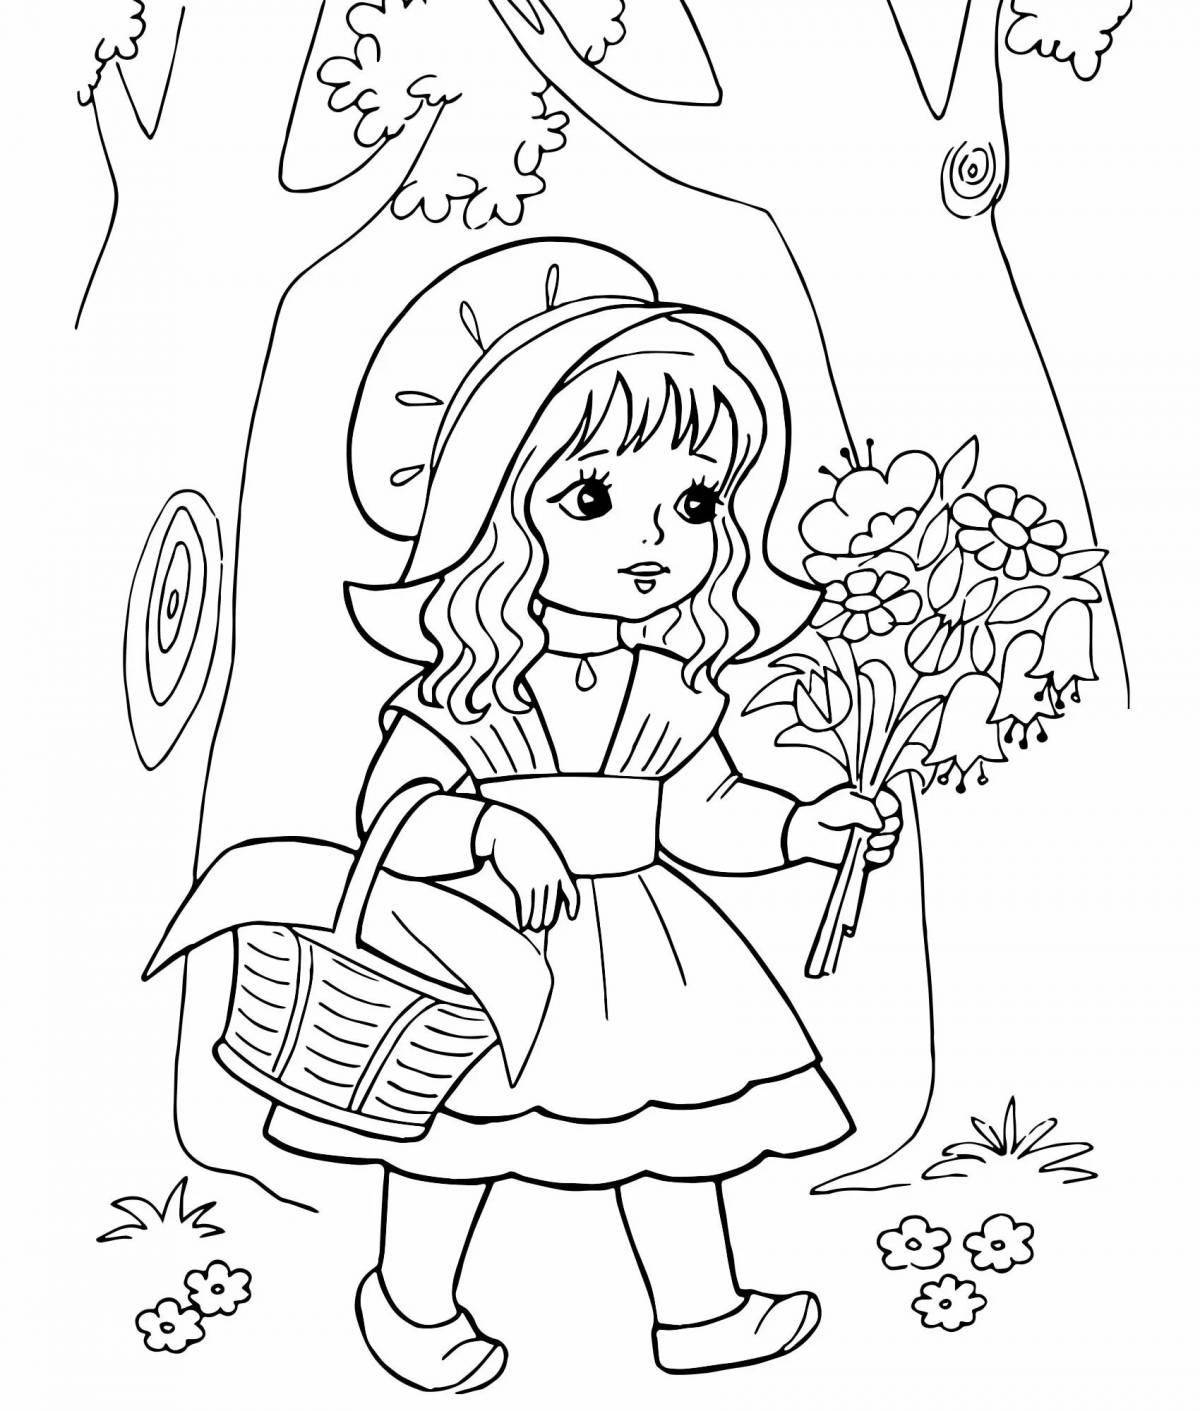 Magic Little Red Riding Hood coloring book